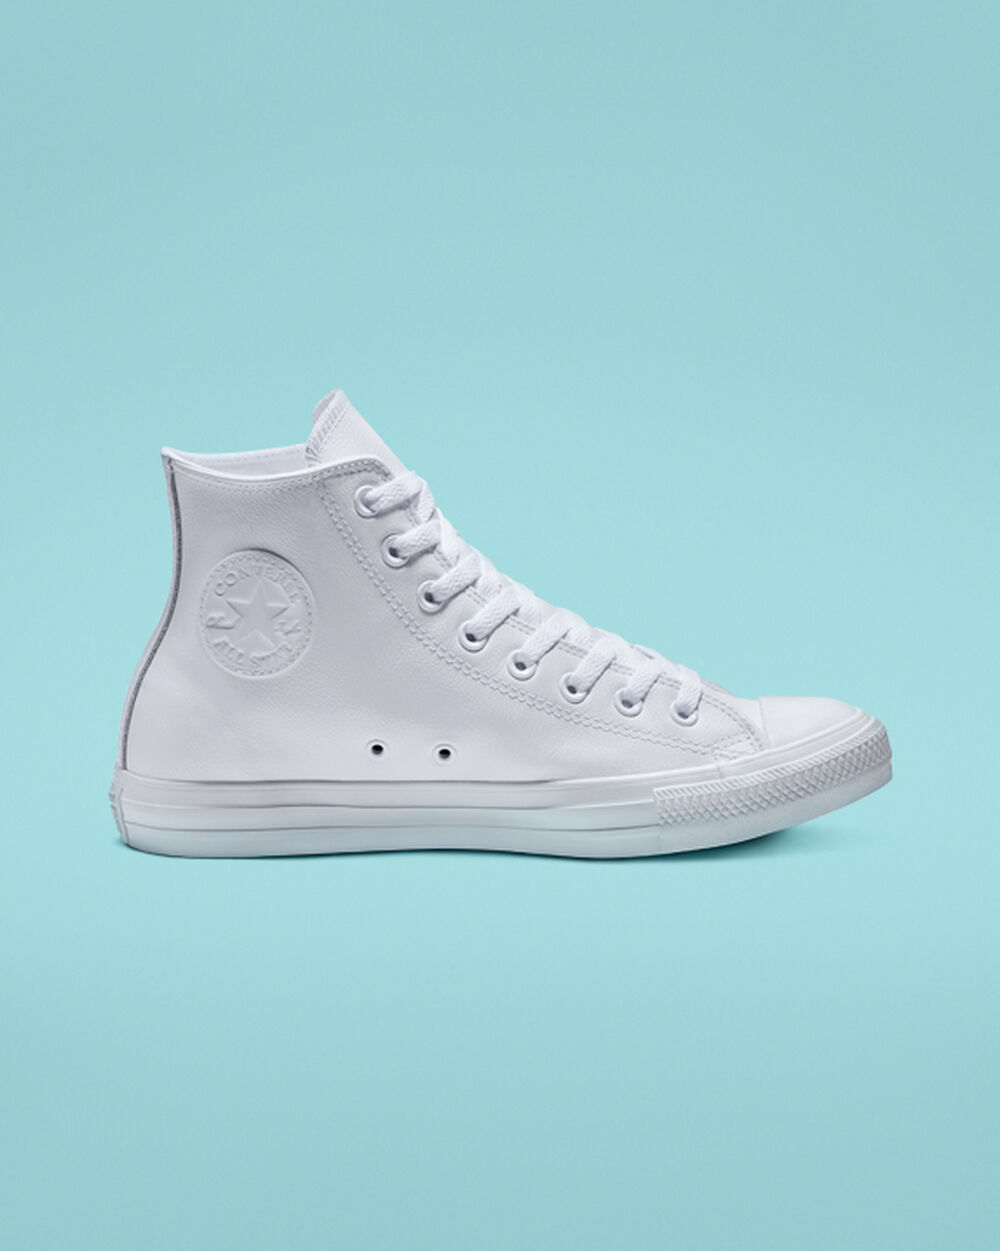 Tenis Converse Chuck Taylor All Star Mujer Blancos | Mexico-402676